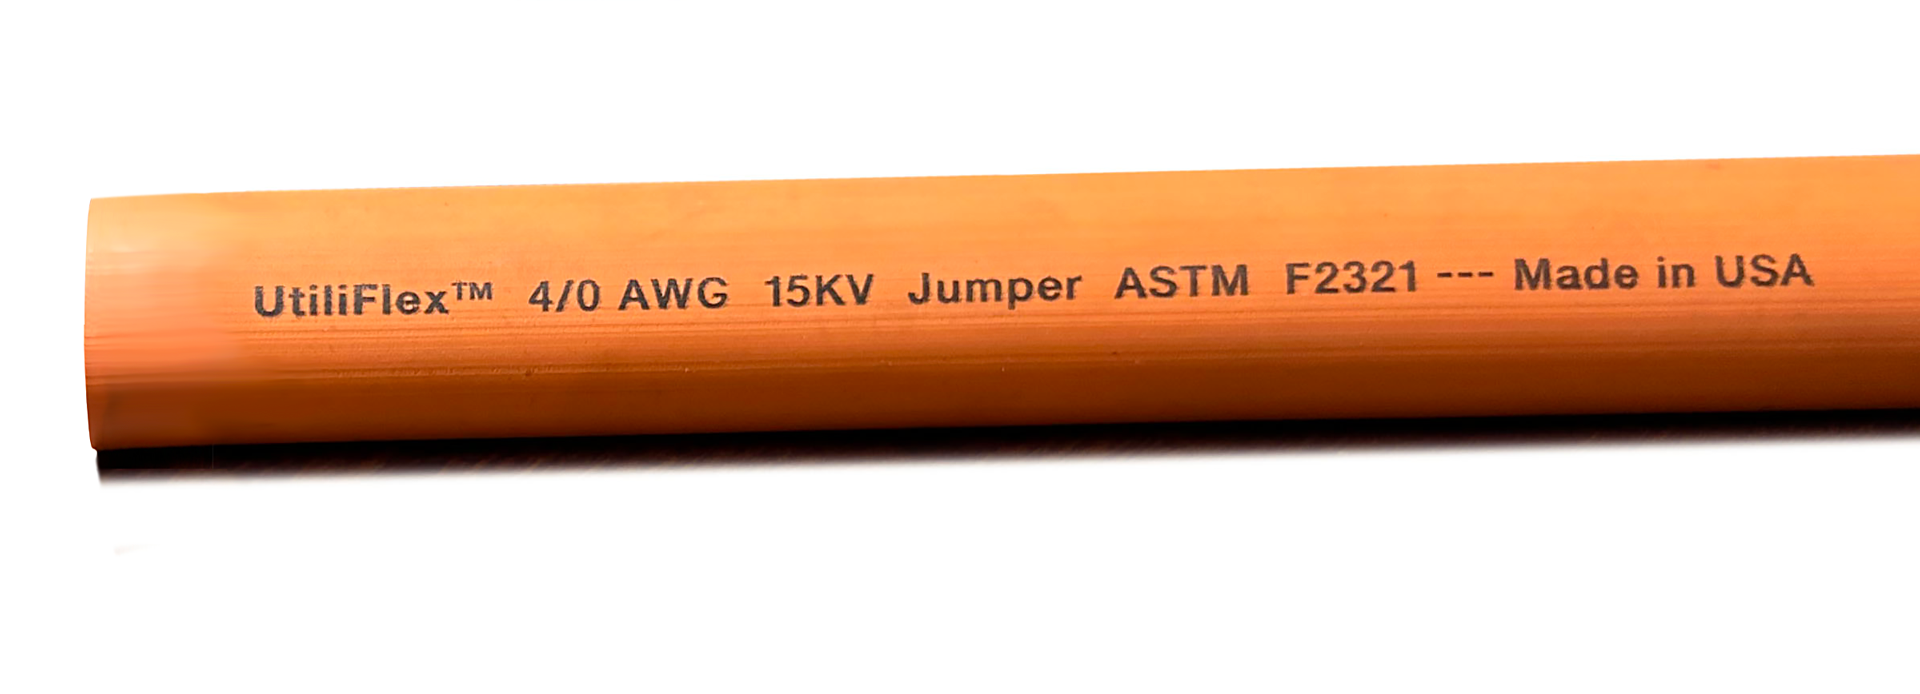 Kalas 90°C NON-SHIELDED JUMPER CABLE<br />
Suitable as a temporary flexible power cable for temporary By-Pass connections.<br />
CONSTRUCTION<br />
Conductor: Annealed Flexible Bare Copper per ASTM B3 & ASTM B172 or Tinned Copper per ASTM B33 & ASTM B172<br />
Separator: Semi-conductive tape separator between the copper and ERP Insulation<br />
Insulation: Thermoset Ethylene-Propylene Rubber (EPR)<br />
BK/JC/8.20<br />
Specifications contained herein reflect current data and are<br />
subject to change. Values are nominal and/or approximate.<br />
ISO 9001:2015 CERTIFIED<br />
ISO 14001:2015 CERTIFIED<br />
MADE IN THE USA<br />
LISTED<br />
 Kalas